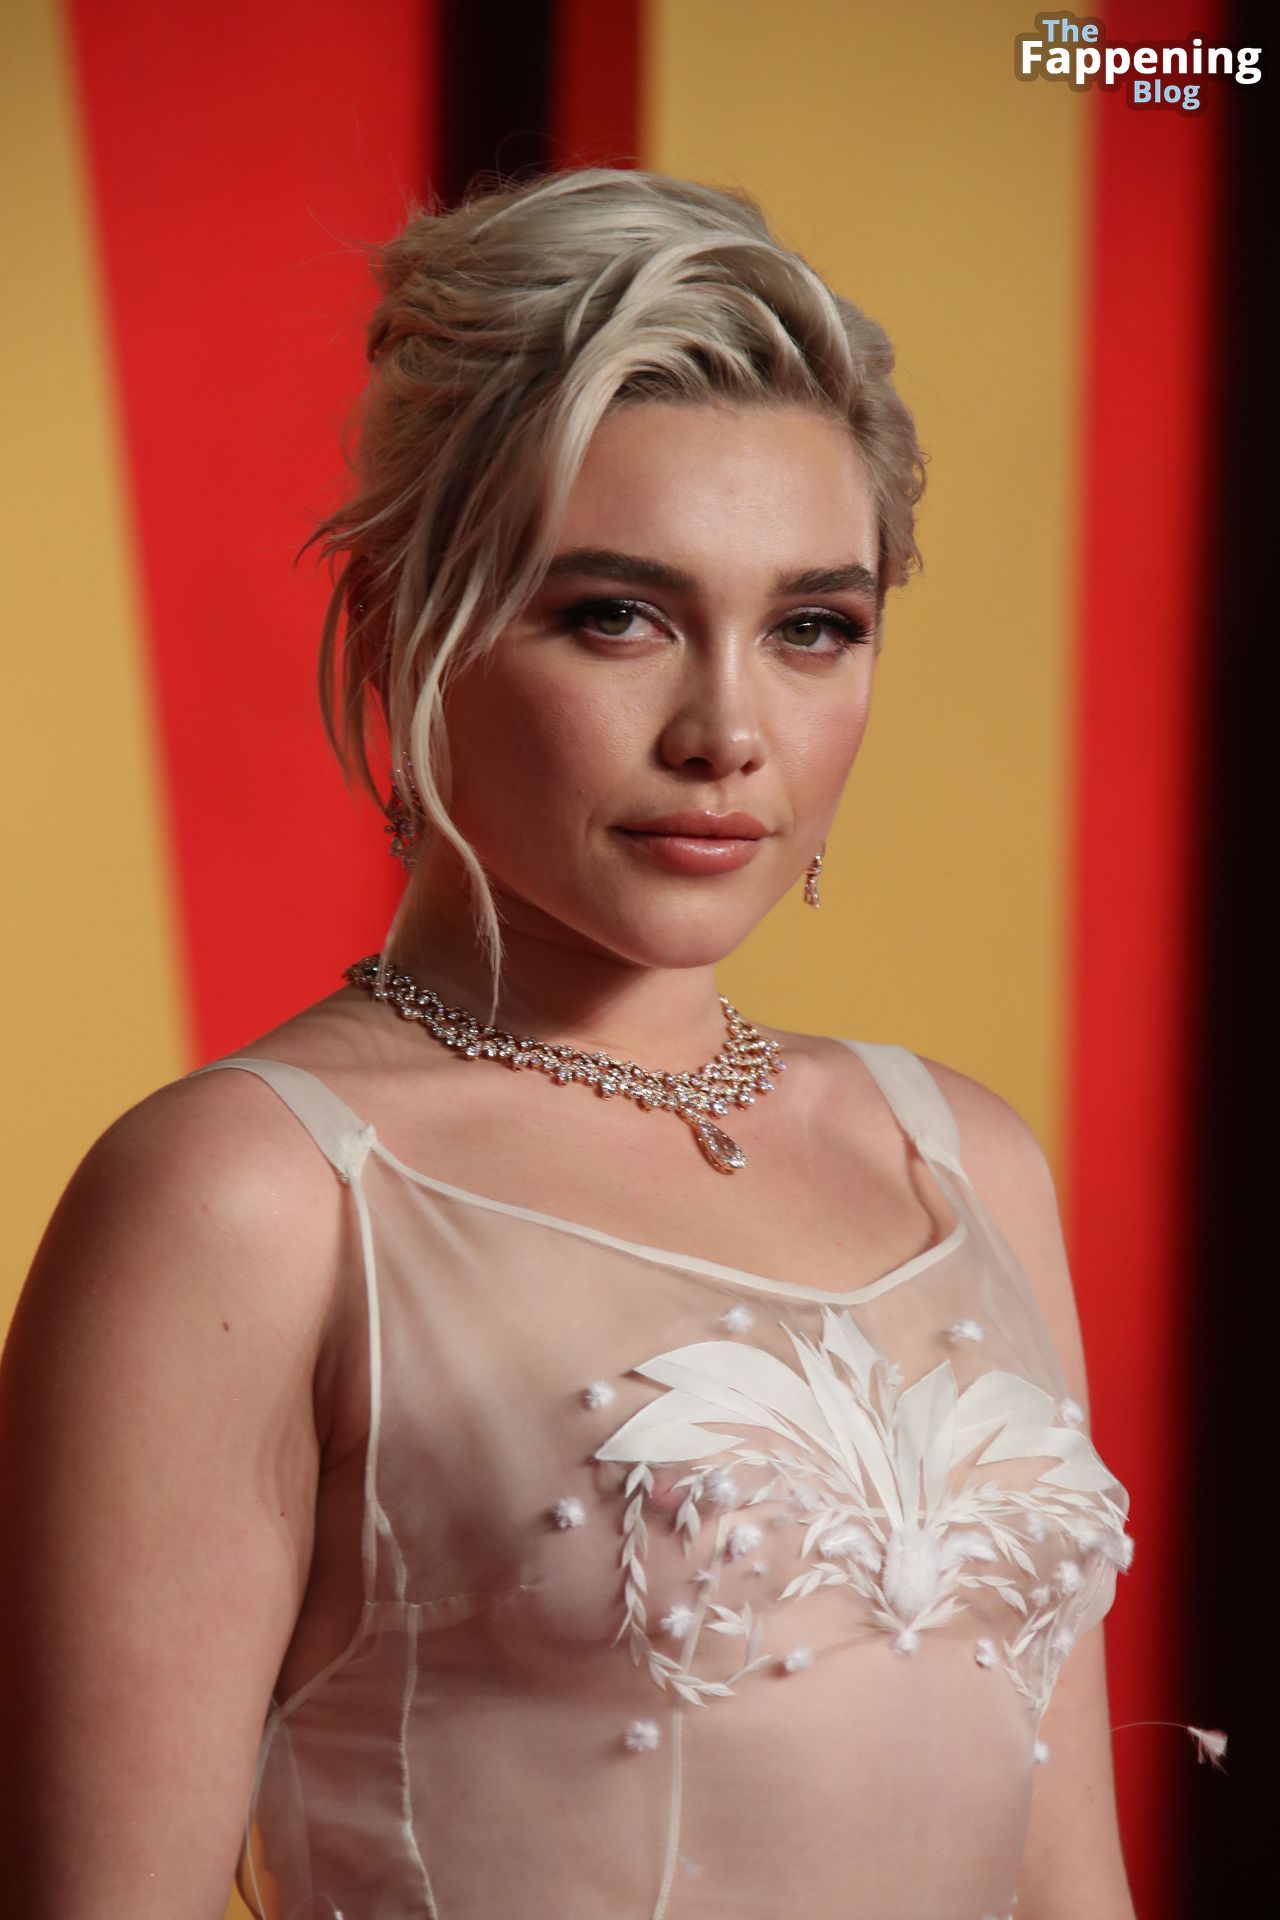 Florence-Pugh-Nude-3-The-Fappening-Blog.jpg